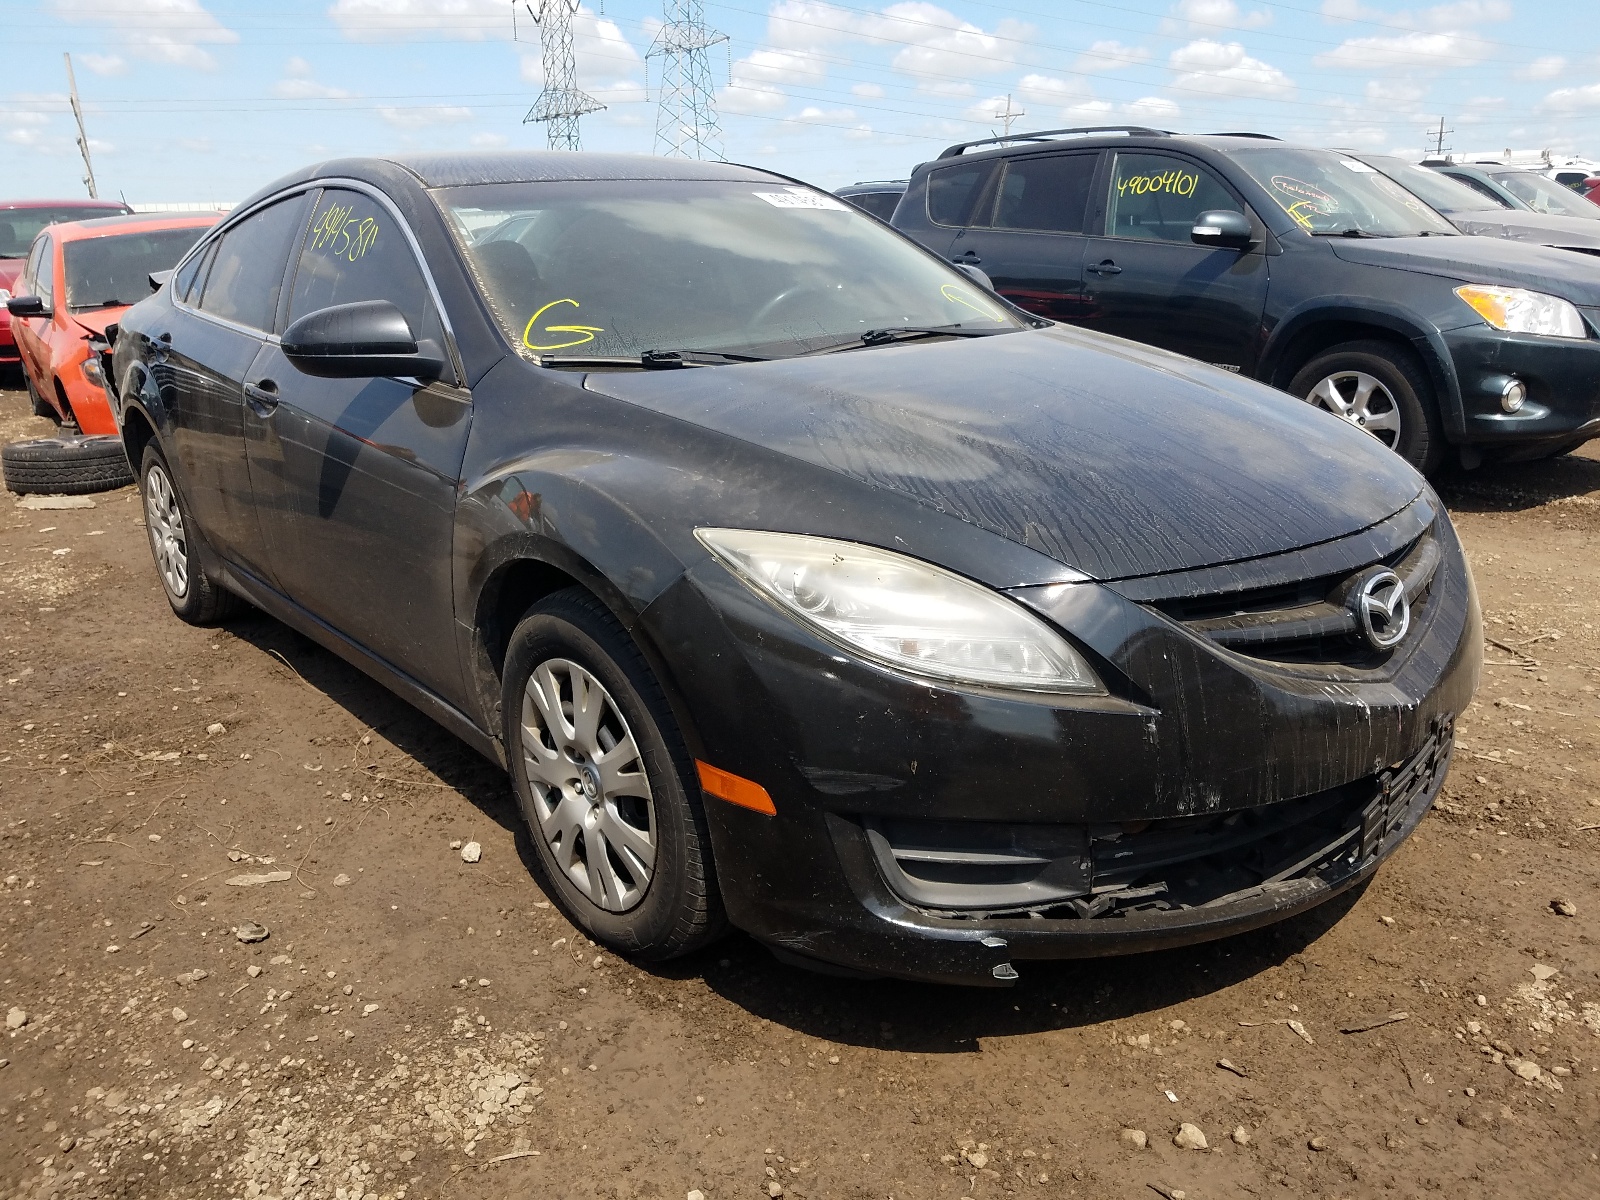 vin: 1YVHZ8BHXA5M49825 1YVHZ8BHXA5M49825 2010 mazda 6 2500 for Sale in 46311, In - Dyer, Dyer, USA